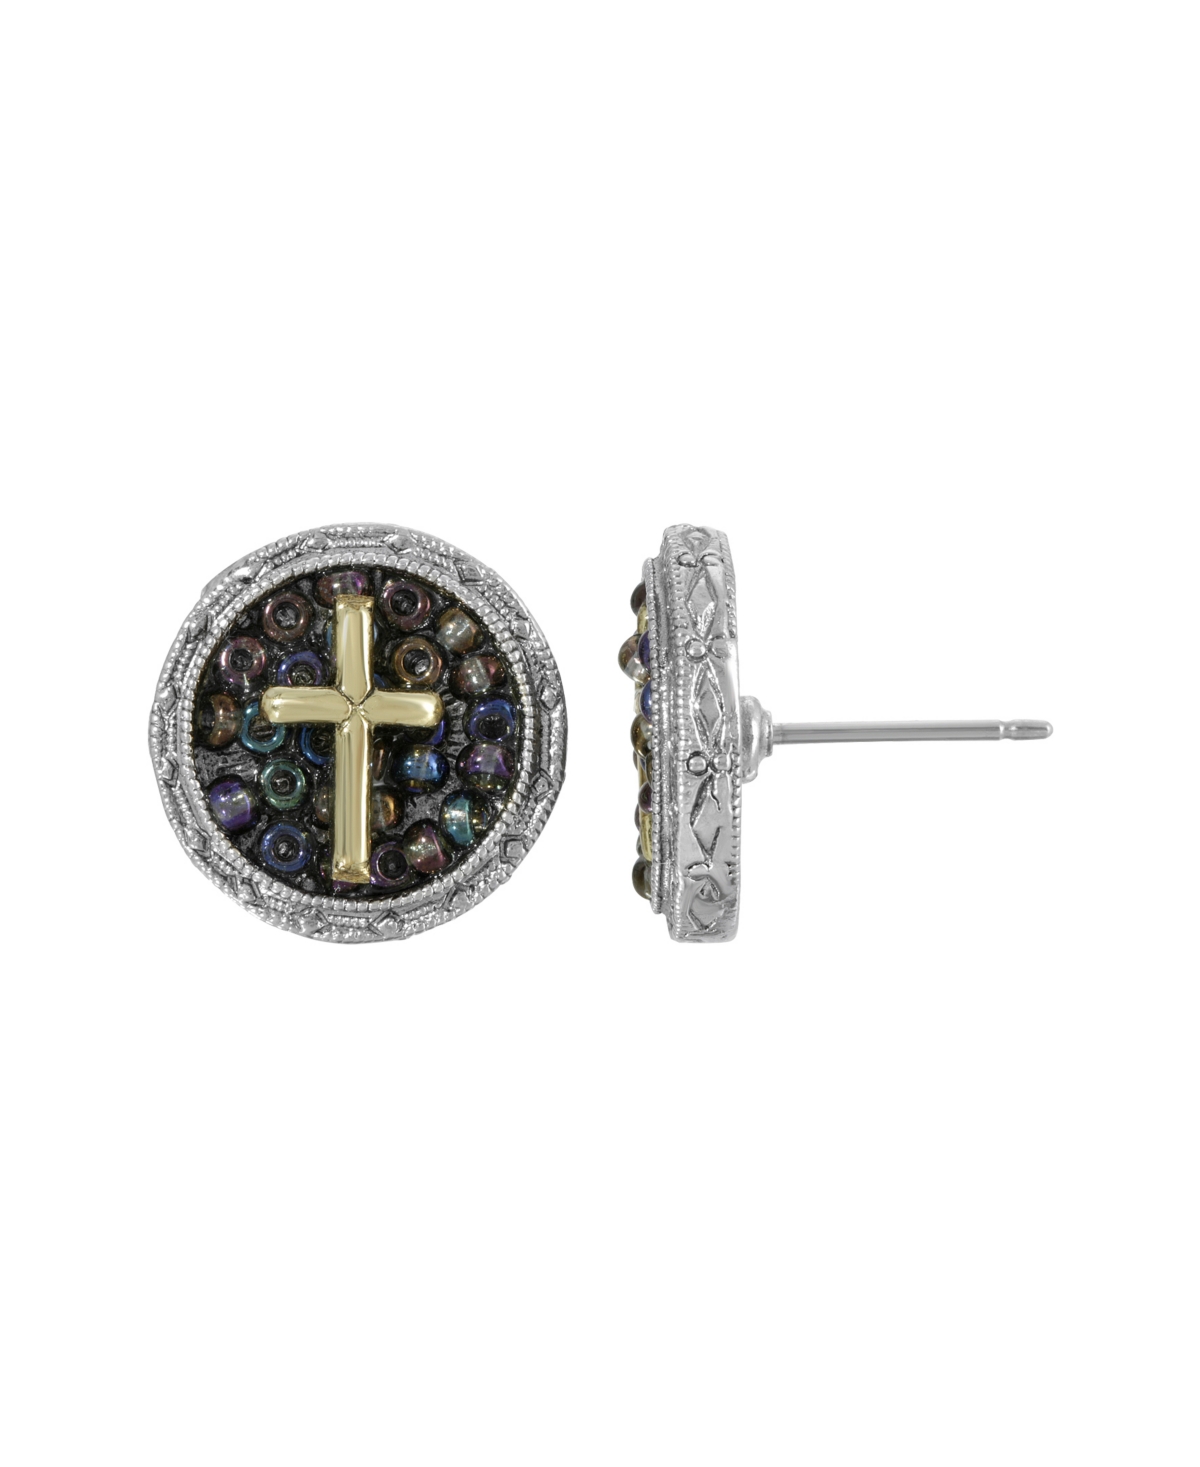 Silver-Tone Carded Multi Color Beaded Cross Round Stud Earrings - Silver-Tone